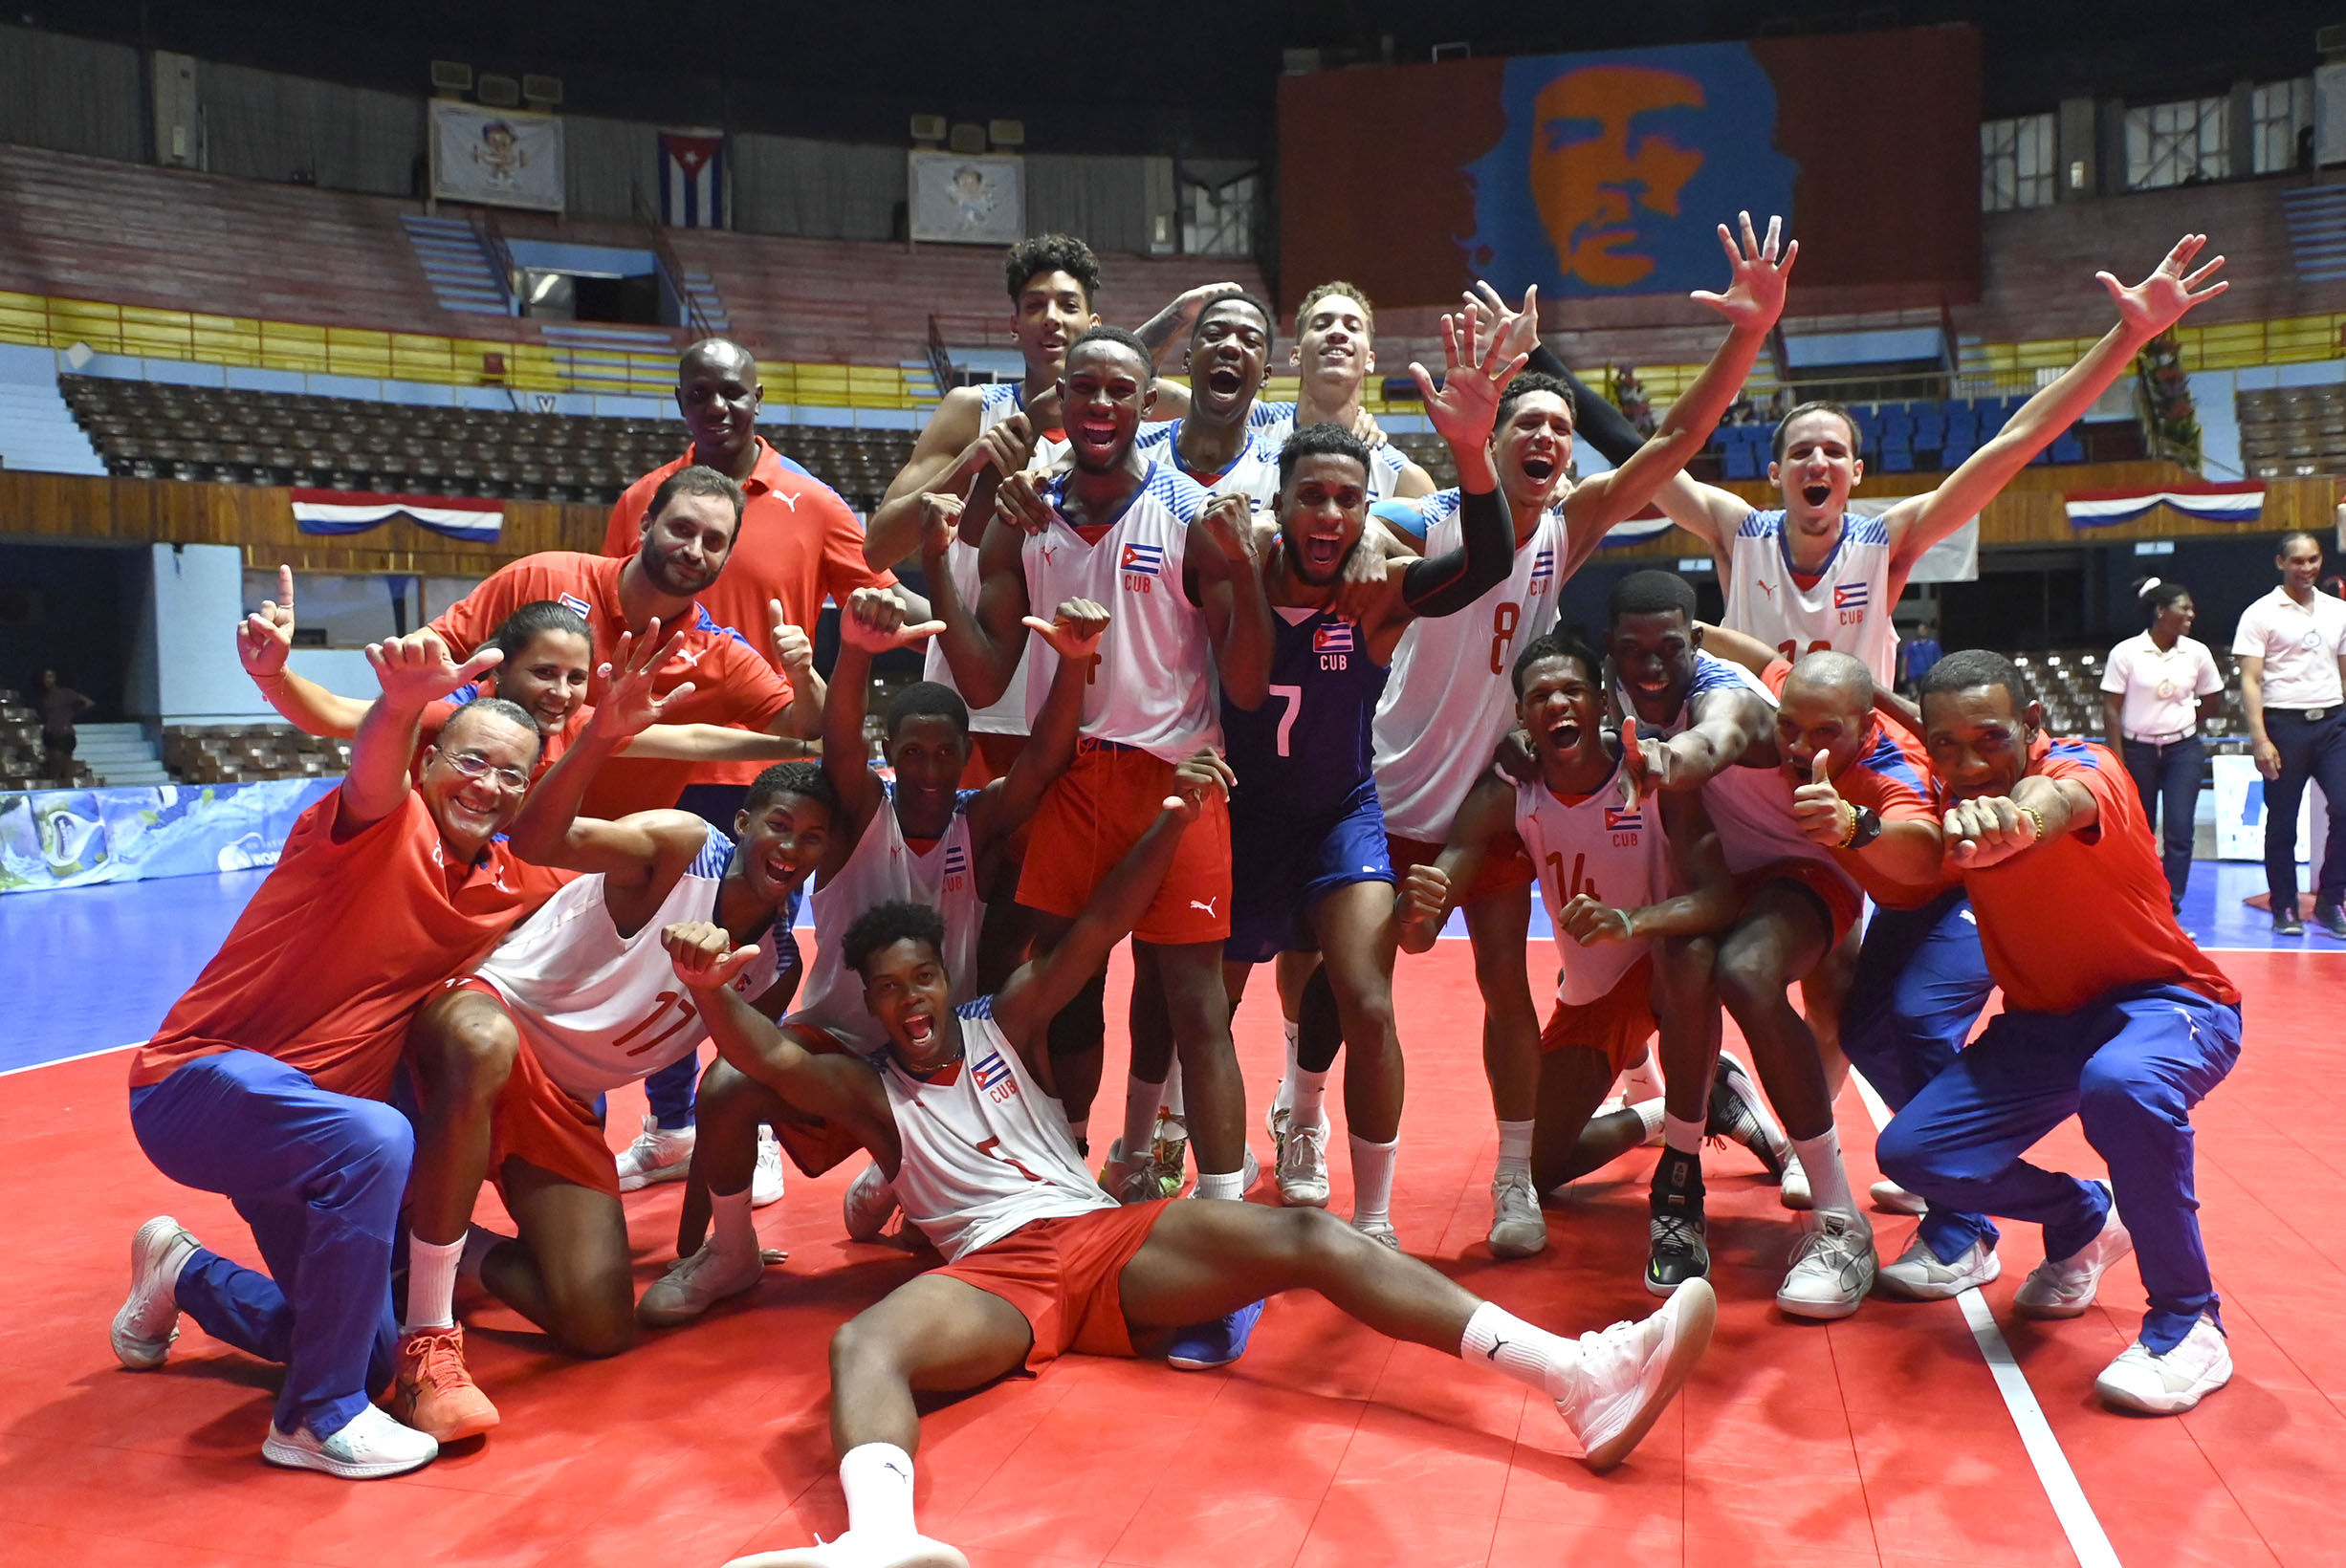 Cuba defeats Chile to complete the semifinalists at the U21 Pan American Cup